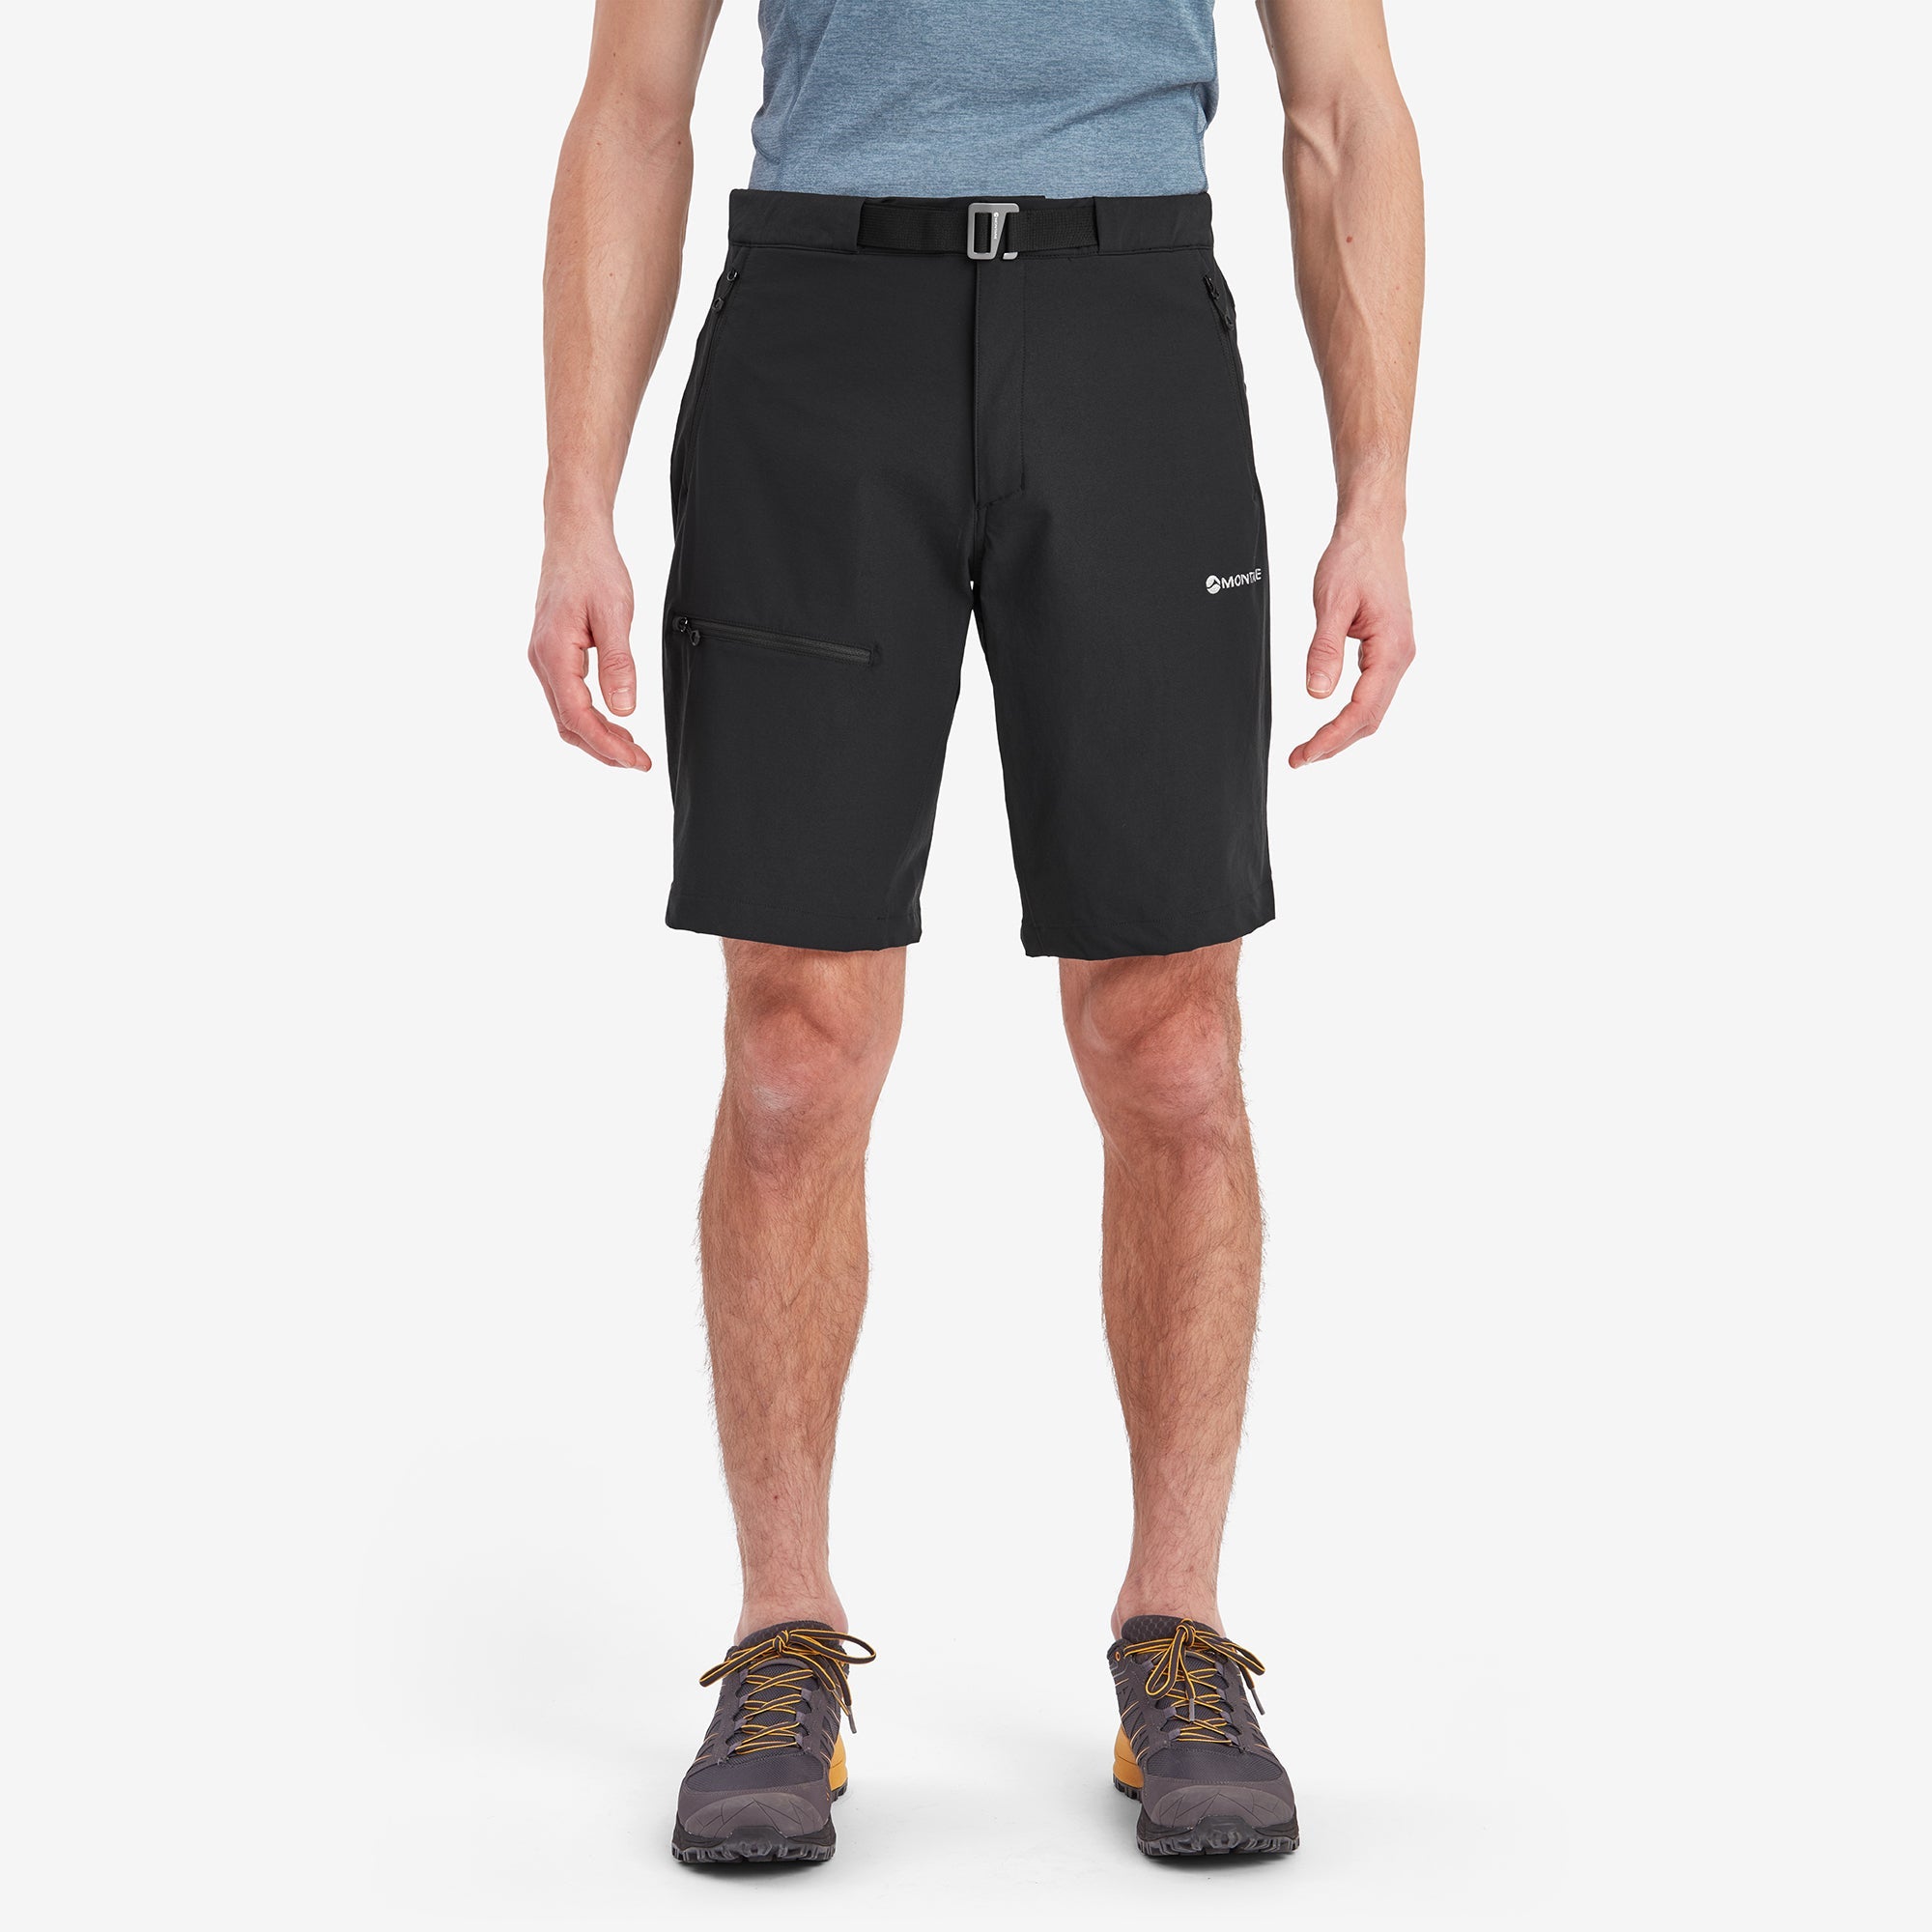 Men's Walking Shorts. Suitable for Hiking, Running and Climbing ...